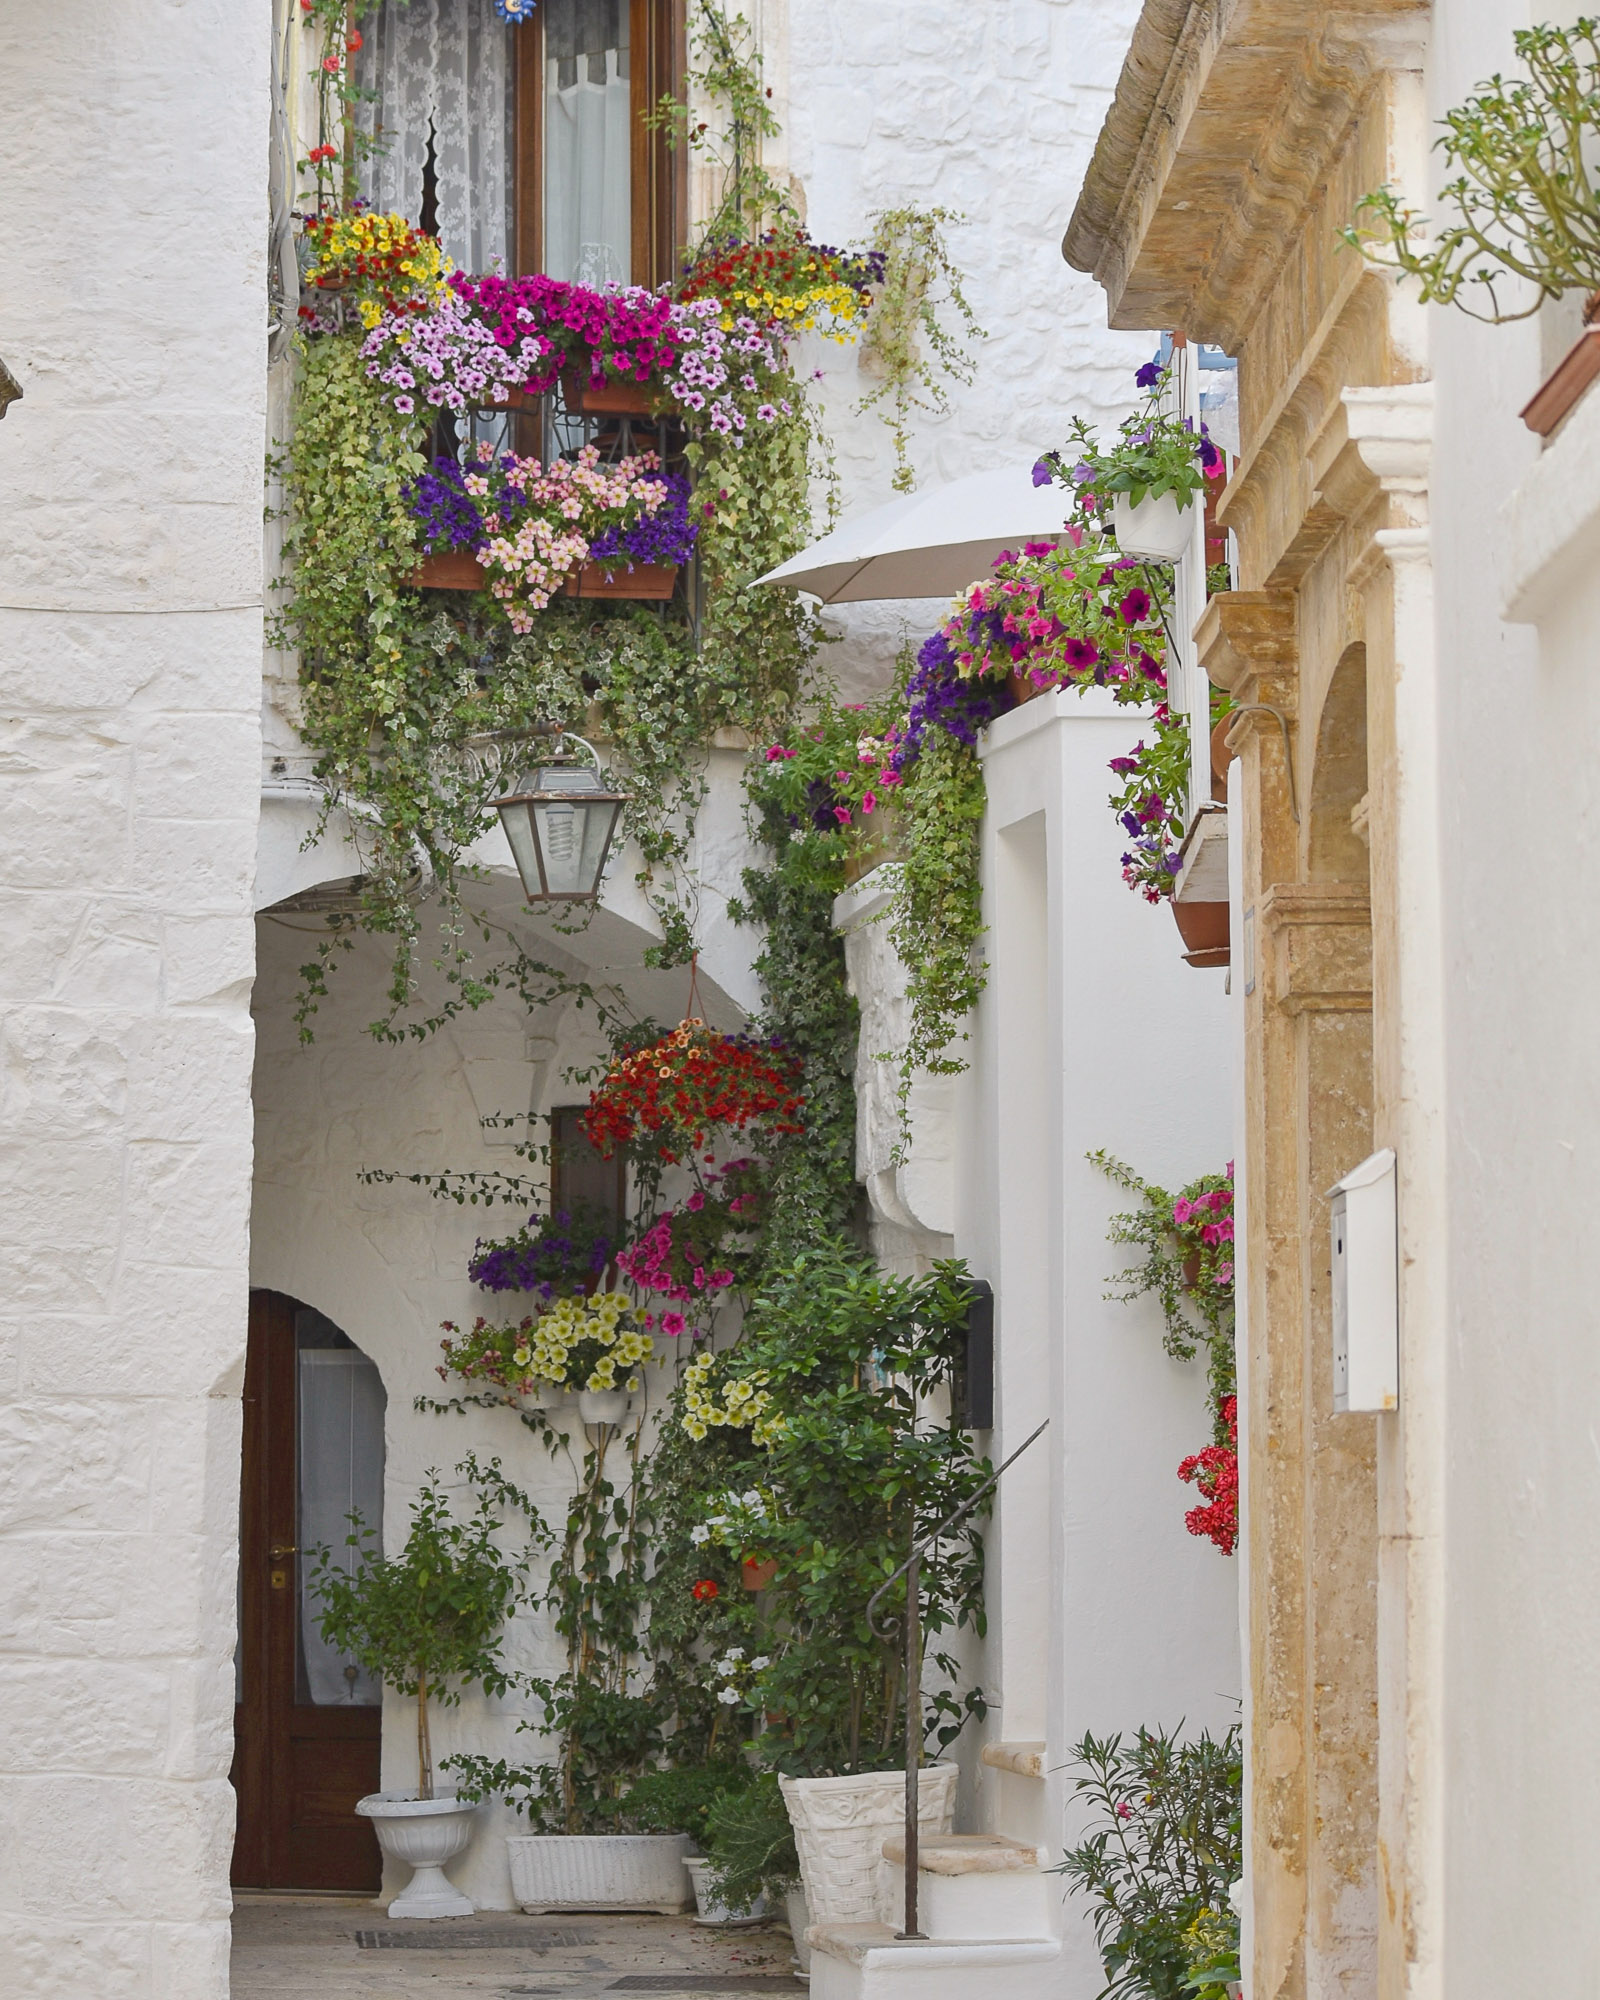 A whitewashed street with colourful flowers